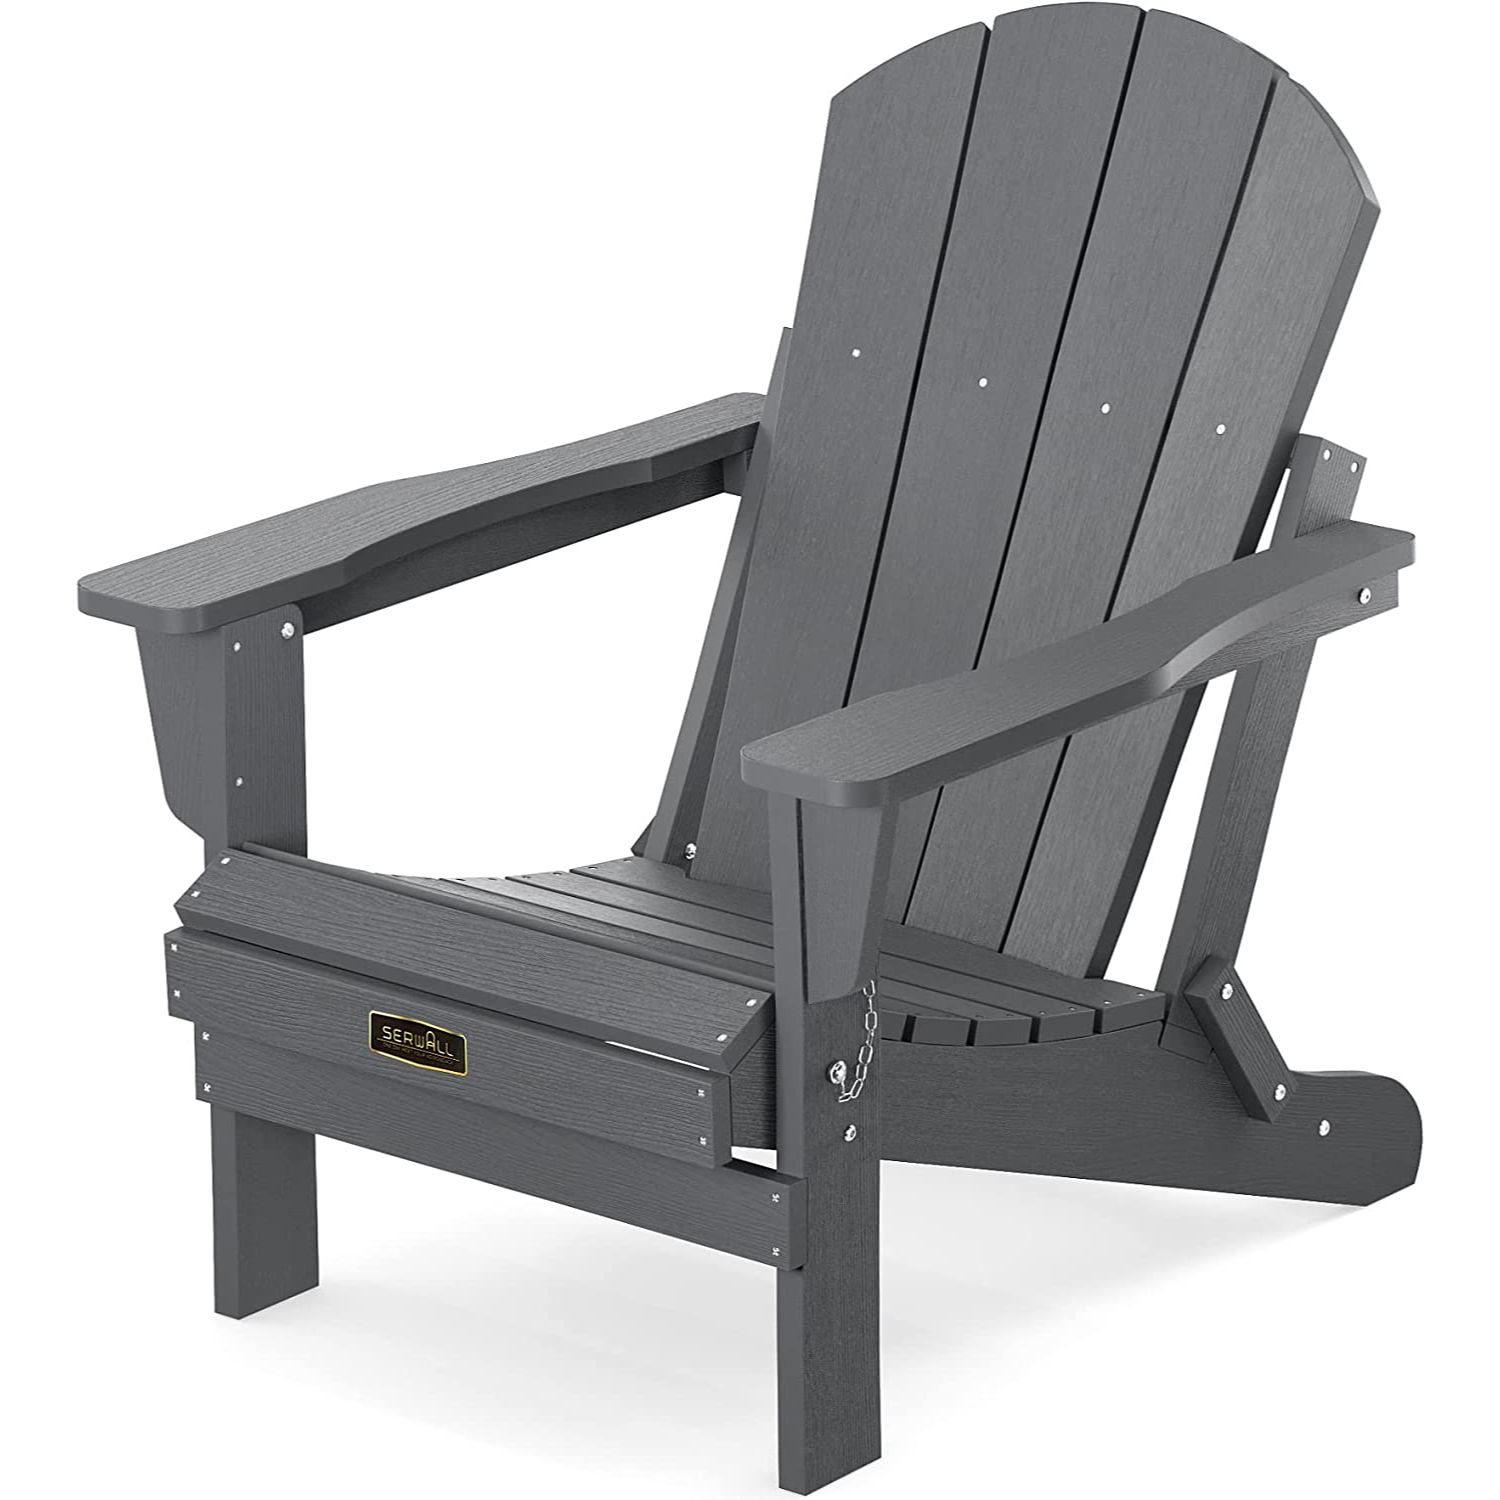 The Best Fire Pit Chairs Option: Folding Adirondack Chair